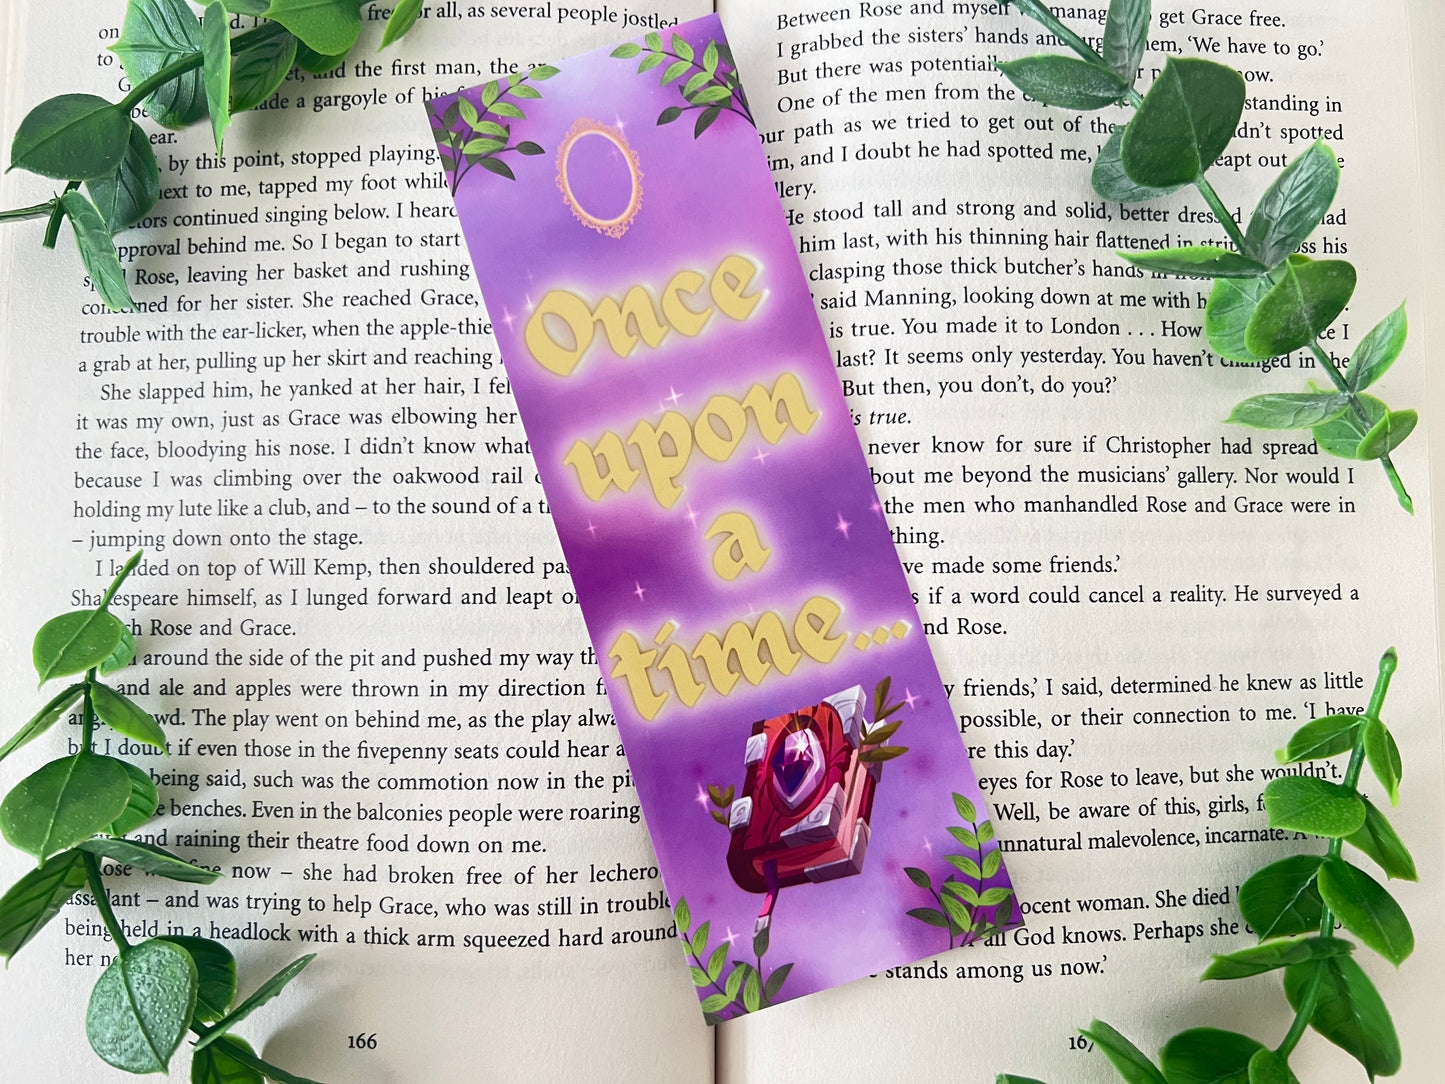 Once Upon a Time Bookmark